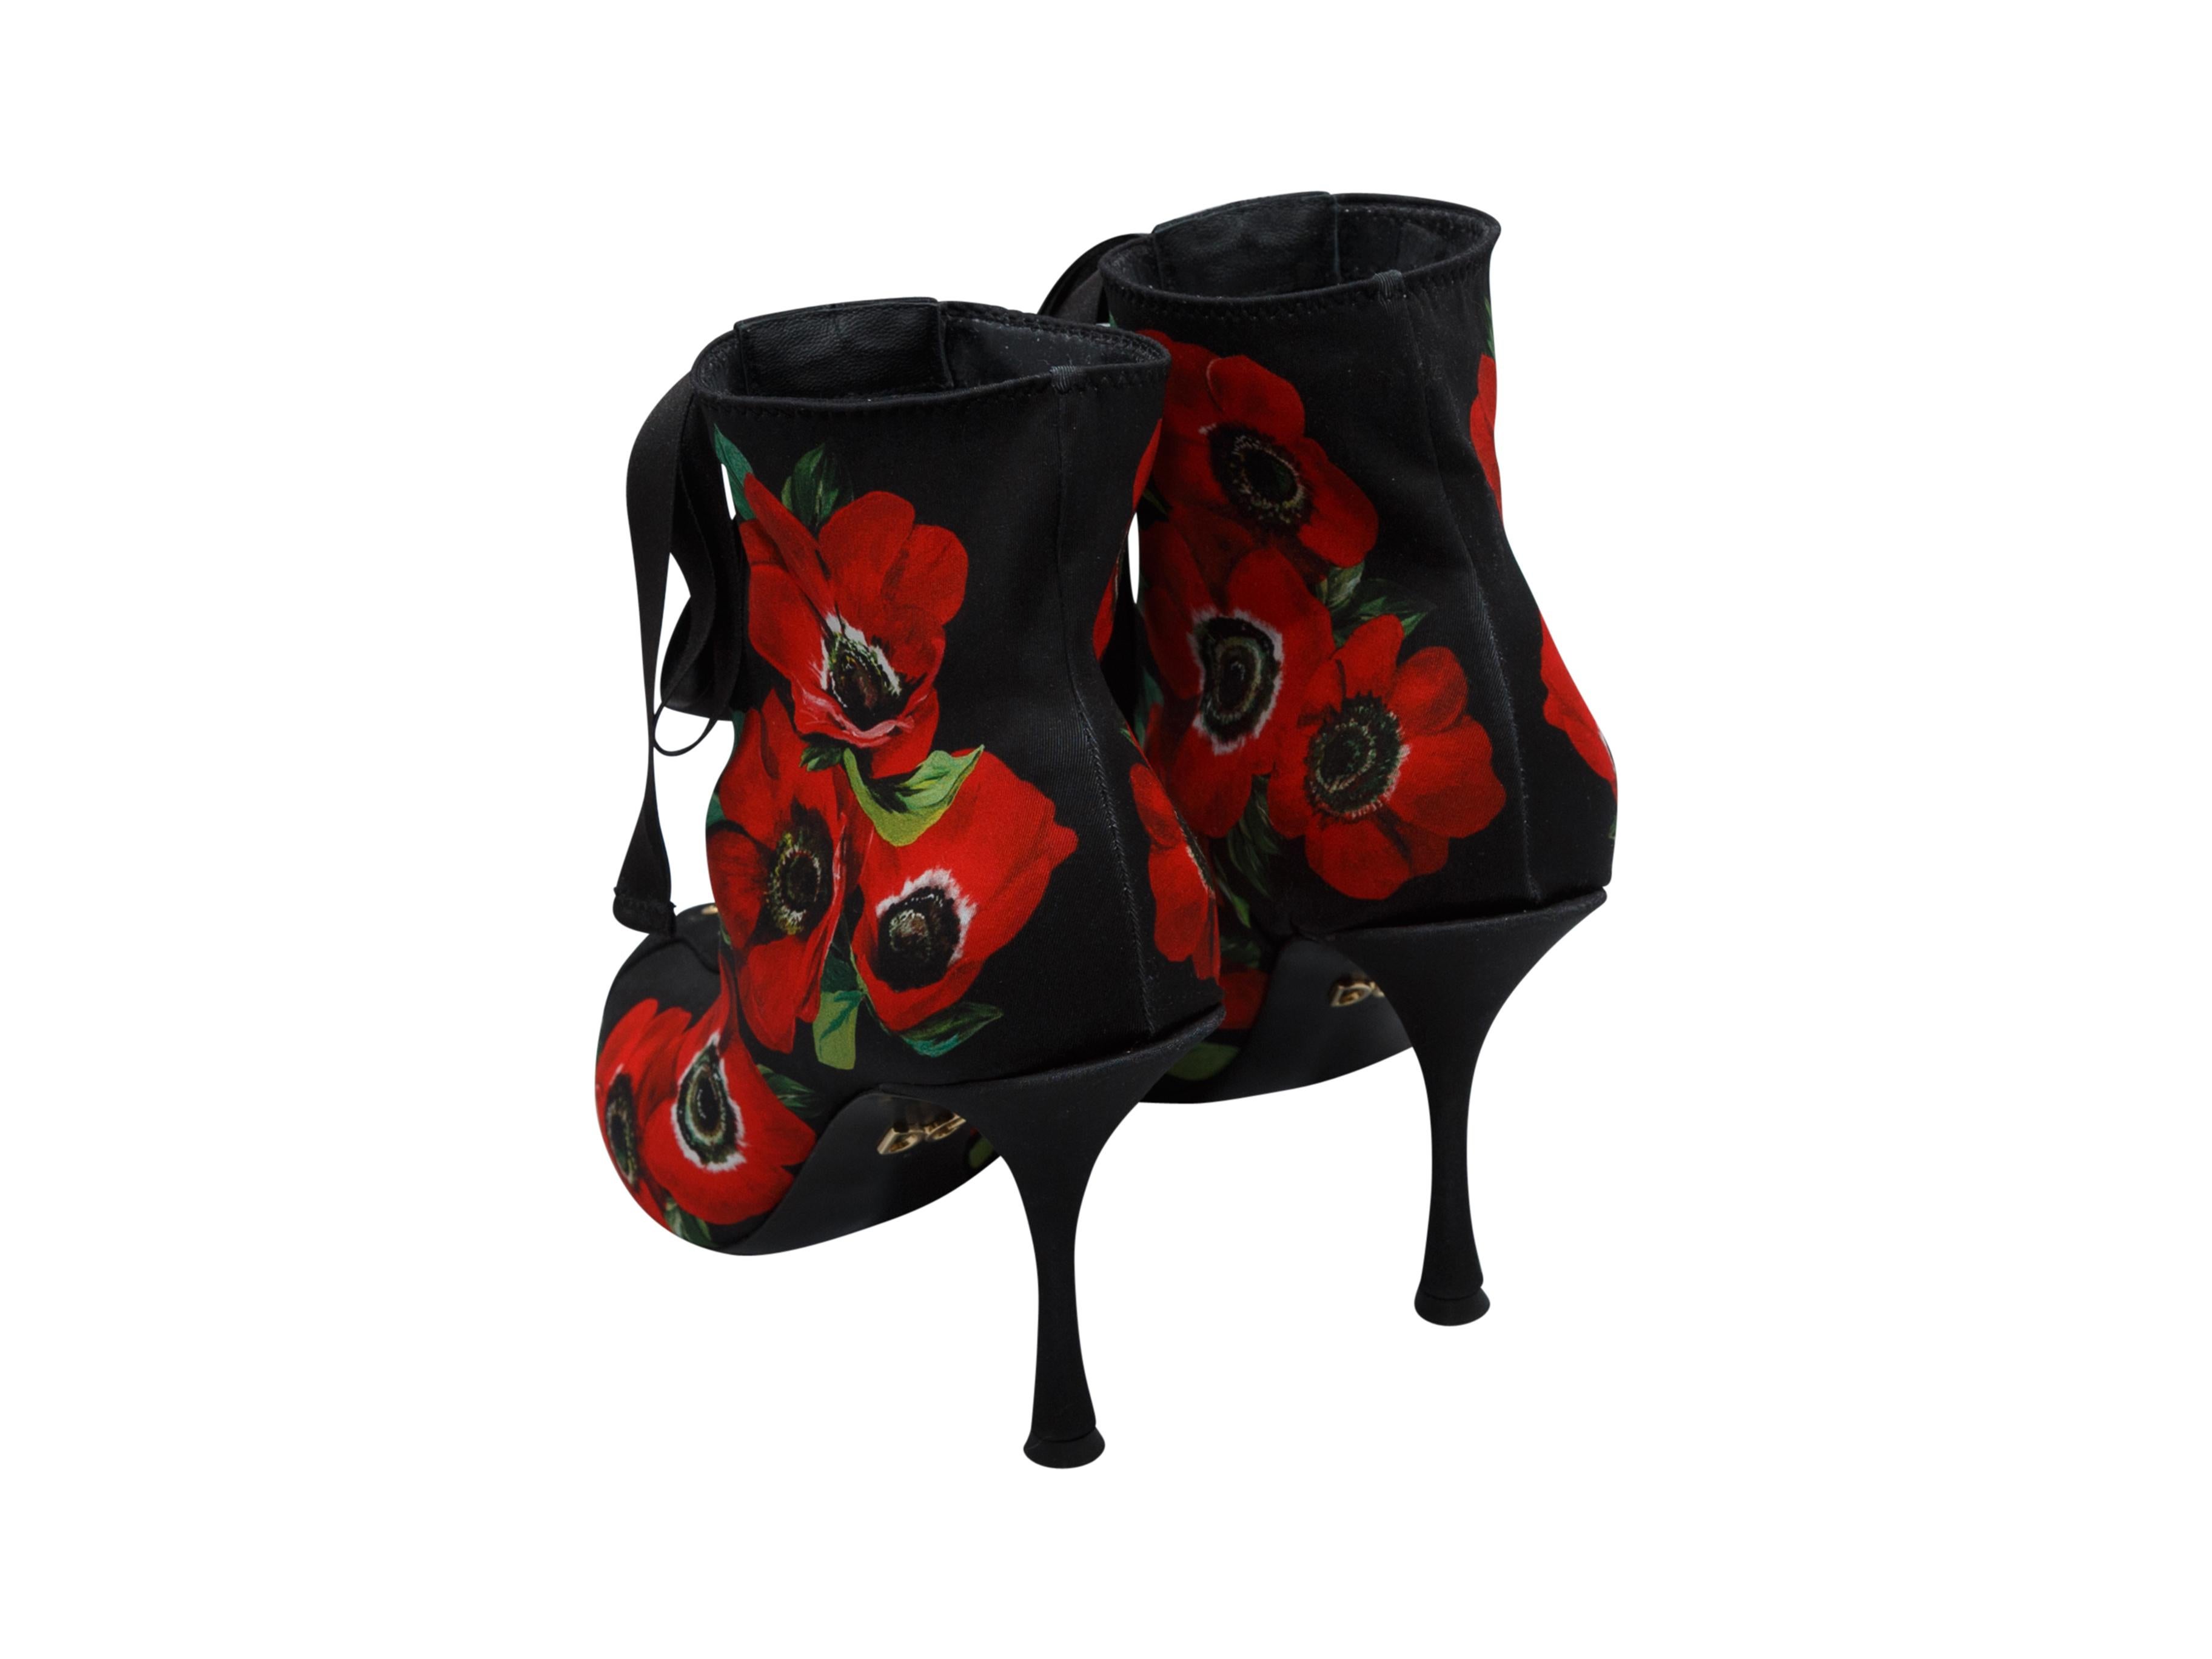 Product details: Black and multicolor satin peep-toe booties by Dolce & Gabbana. Floral print throughout. Lace-up closure at tops. Designer size 39.5.
Condition: Pre-owned. Very good.